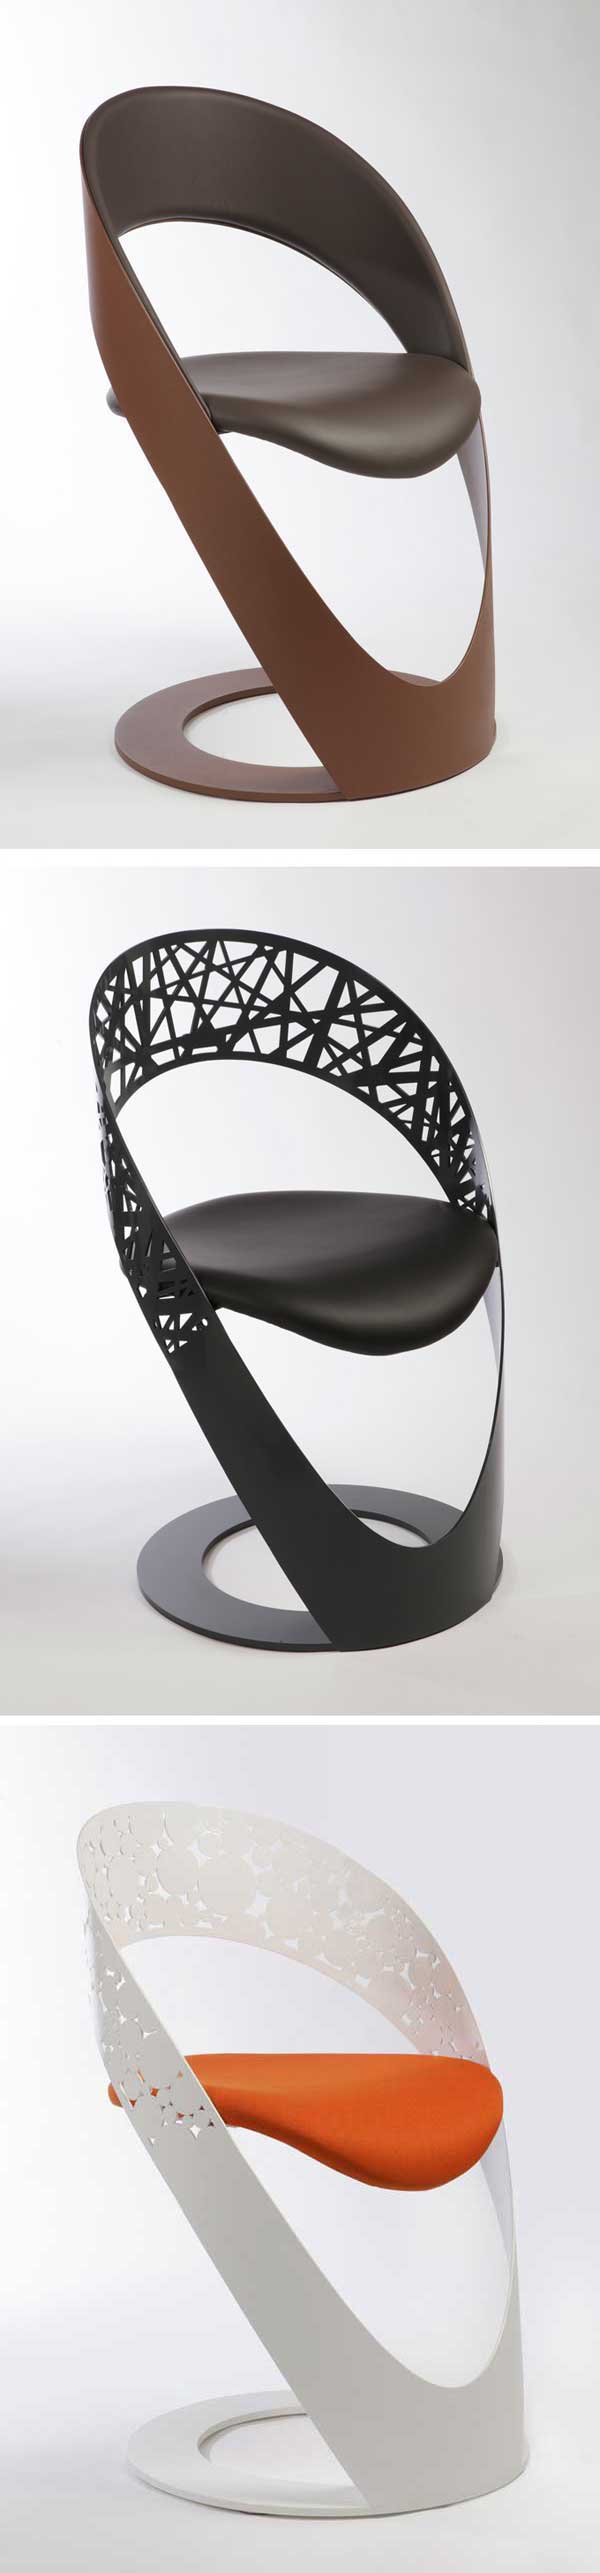 curved-chair-design-Martz-collection-elegant organic forms